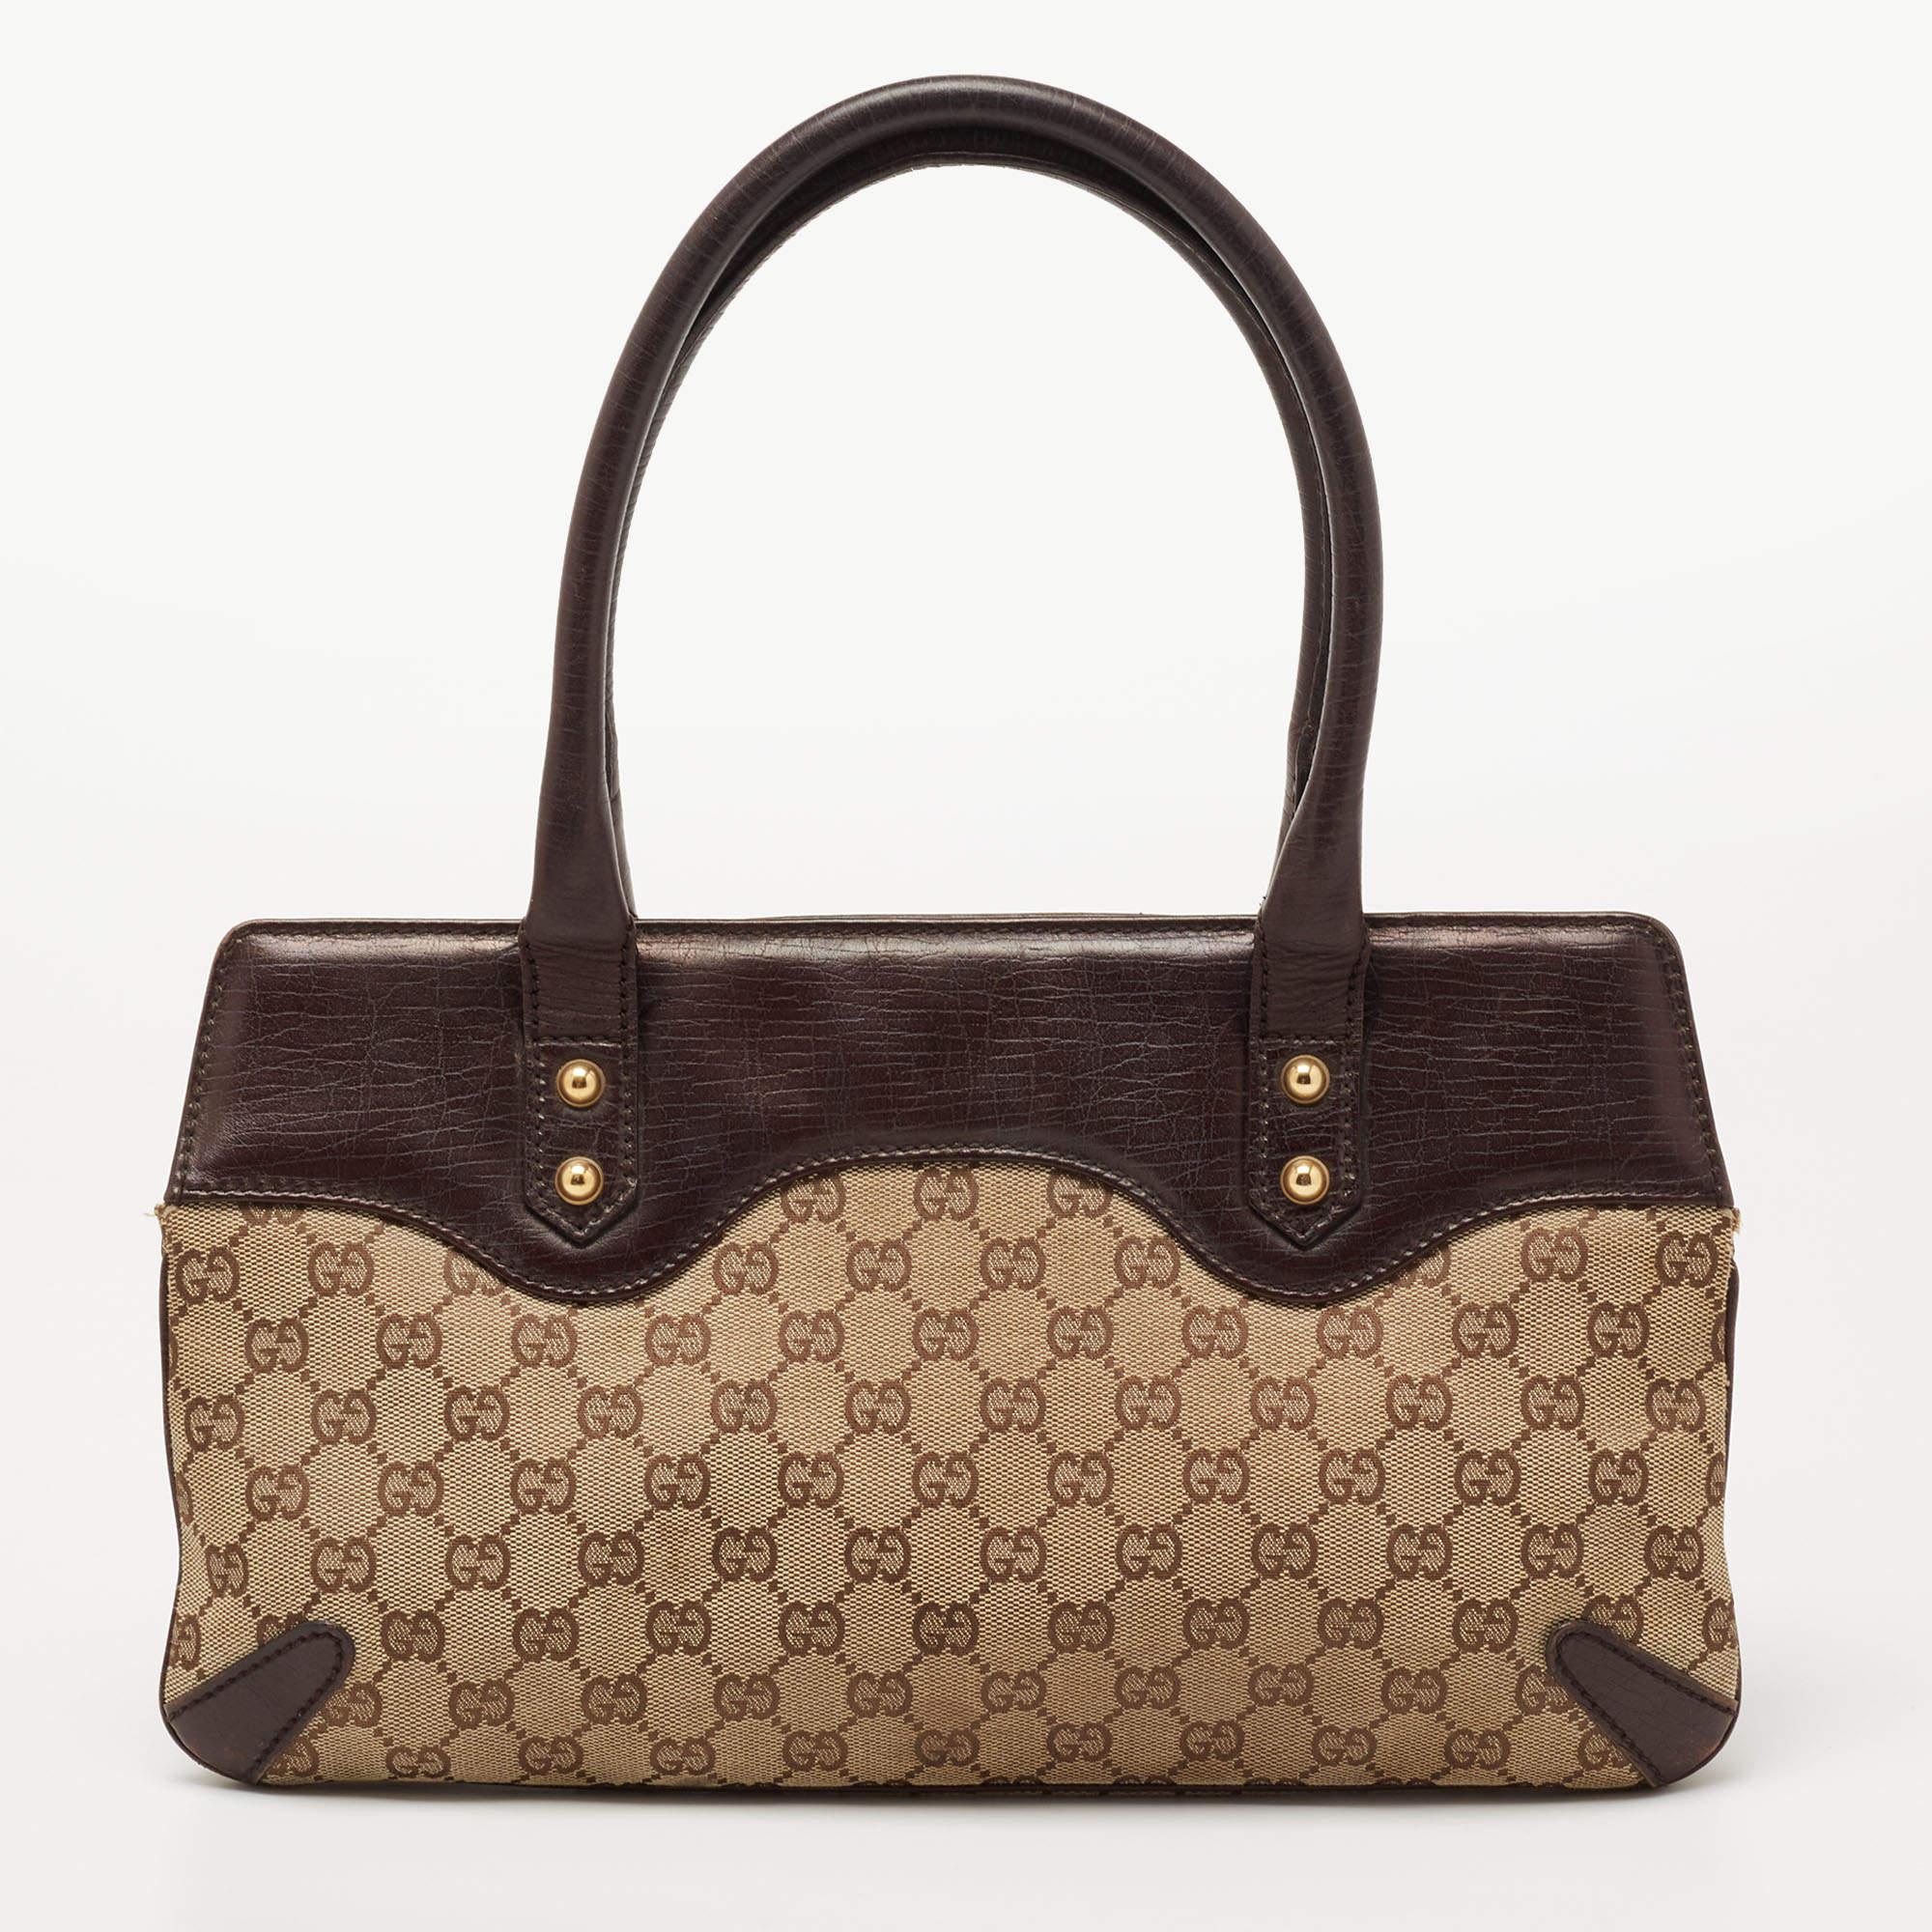 This Gucci tote promises to take you through the day with ease, whether you're at work or out and about in the city. From its design to its structure, the GG canvas & leather bag promises charm and durability. It has top handles, front chain detail,